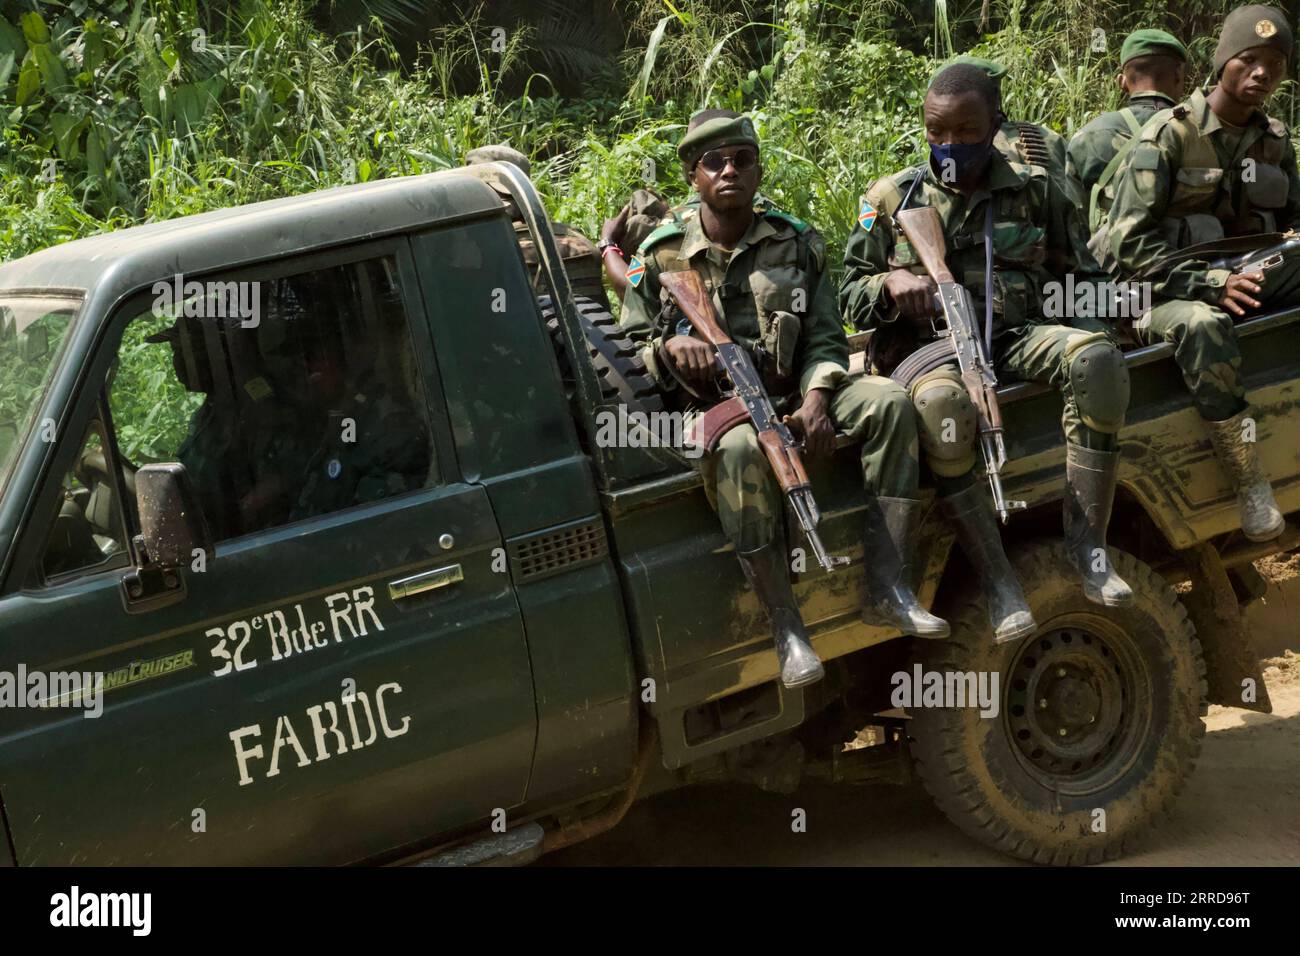 211212 -- , Dec. 12, 2021 -- Soldiers are seen on a military vehicle during a joint military operation against armed forces in Beni territory, northeastern Democratic Republic of the Congo, Dec. 11, 2021. The Armed Forces of the Democratic Republic of the Congo FARDC and Uganda People s Defense Force UPDF on Saturday released the first assessment of their joint military operations against rebels of the Allied Democratic Forces ADF, conducted since Nov. 30 in Beni territory, northeastern DRC. TO GO WITH: DR Congo, Uganda declare calm situation in northeastern DRC following assessment of joint m Stock Photo